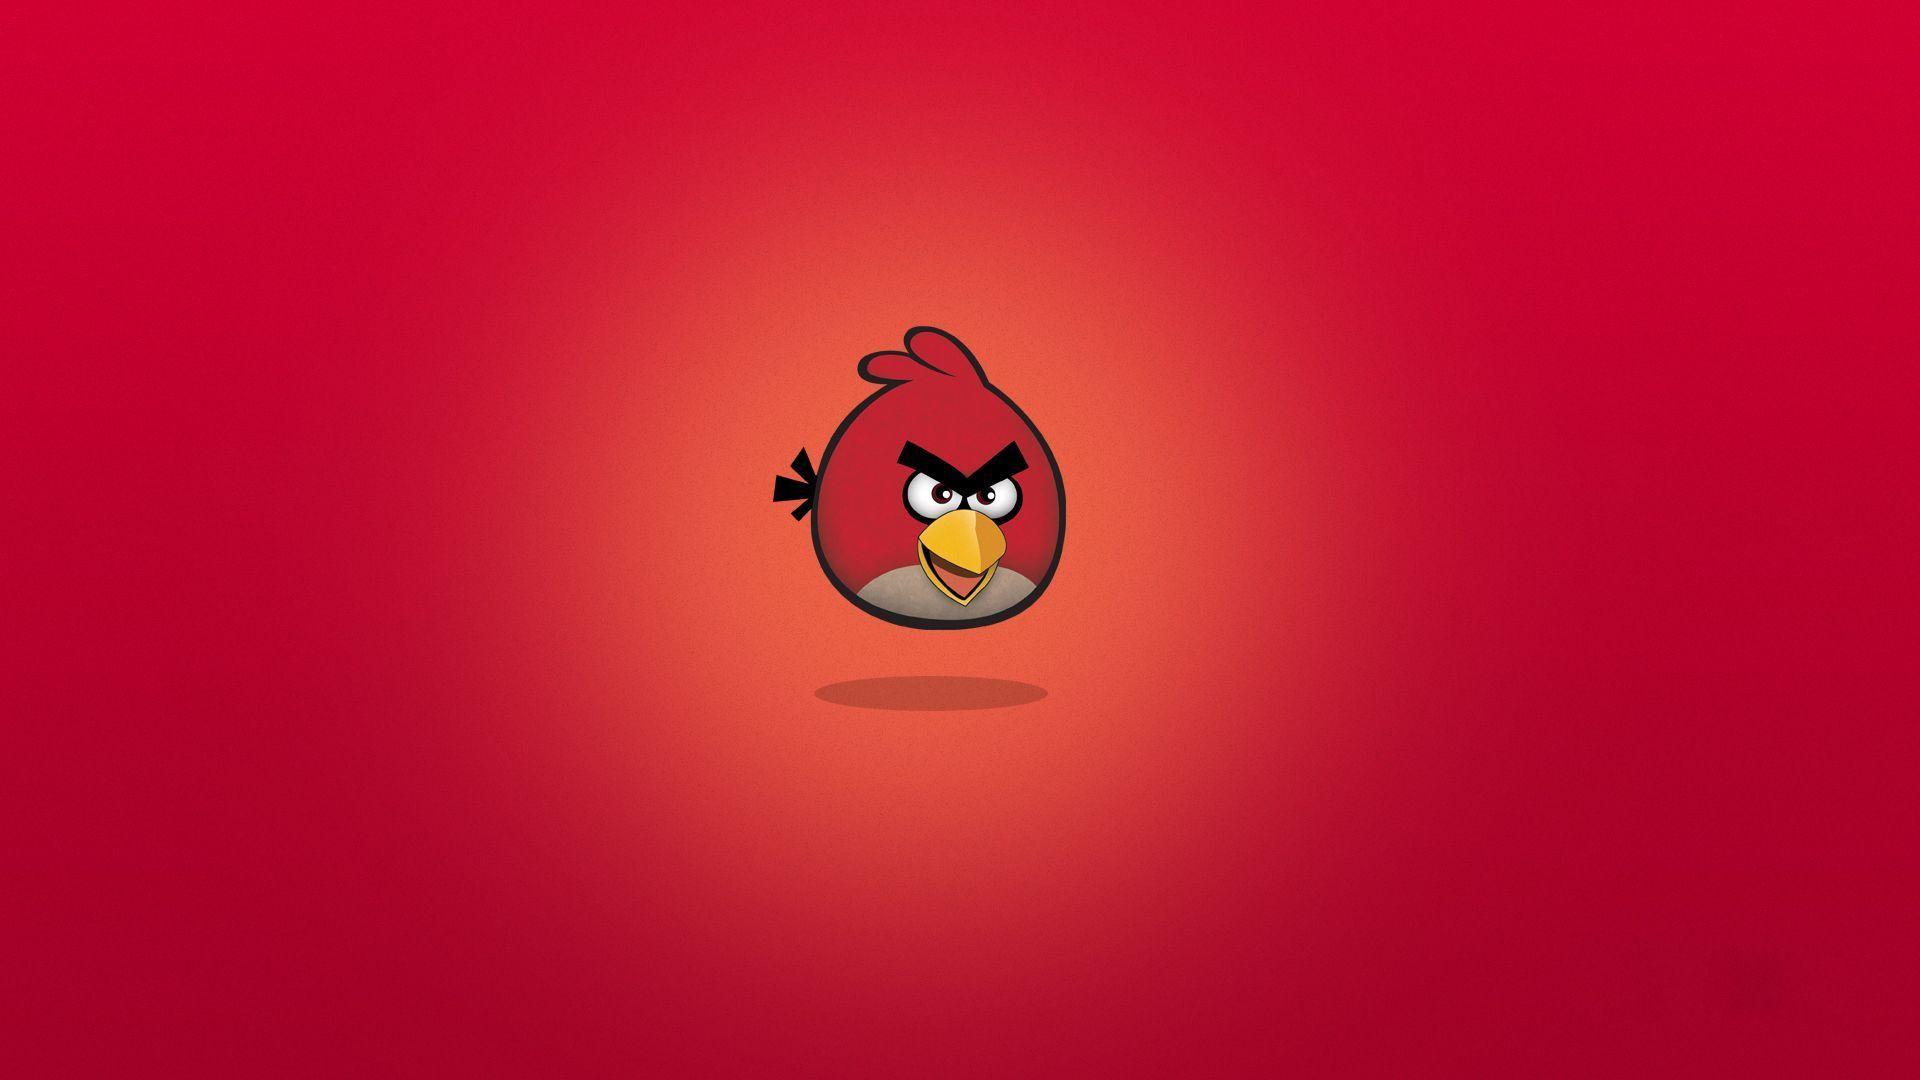 Download 1920x1080 px Angry Birds HD Wallpaper for Free